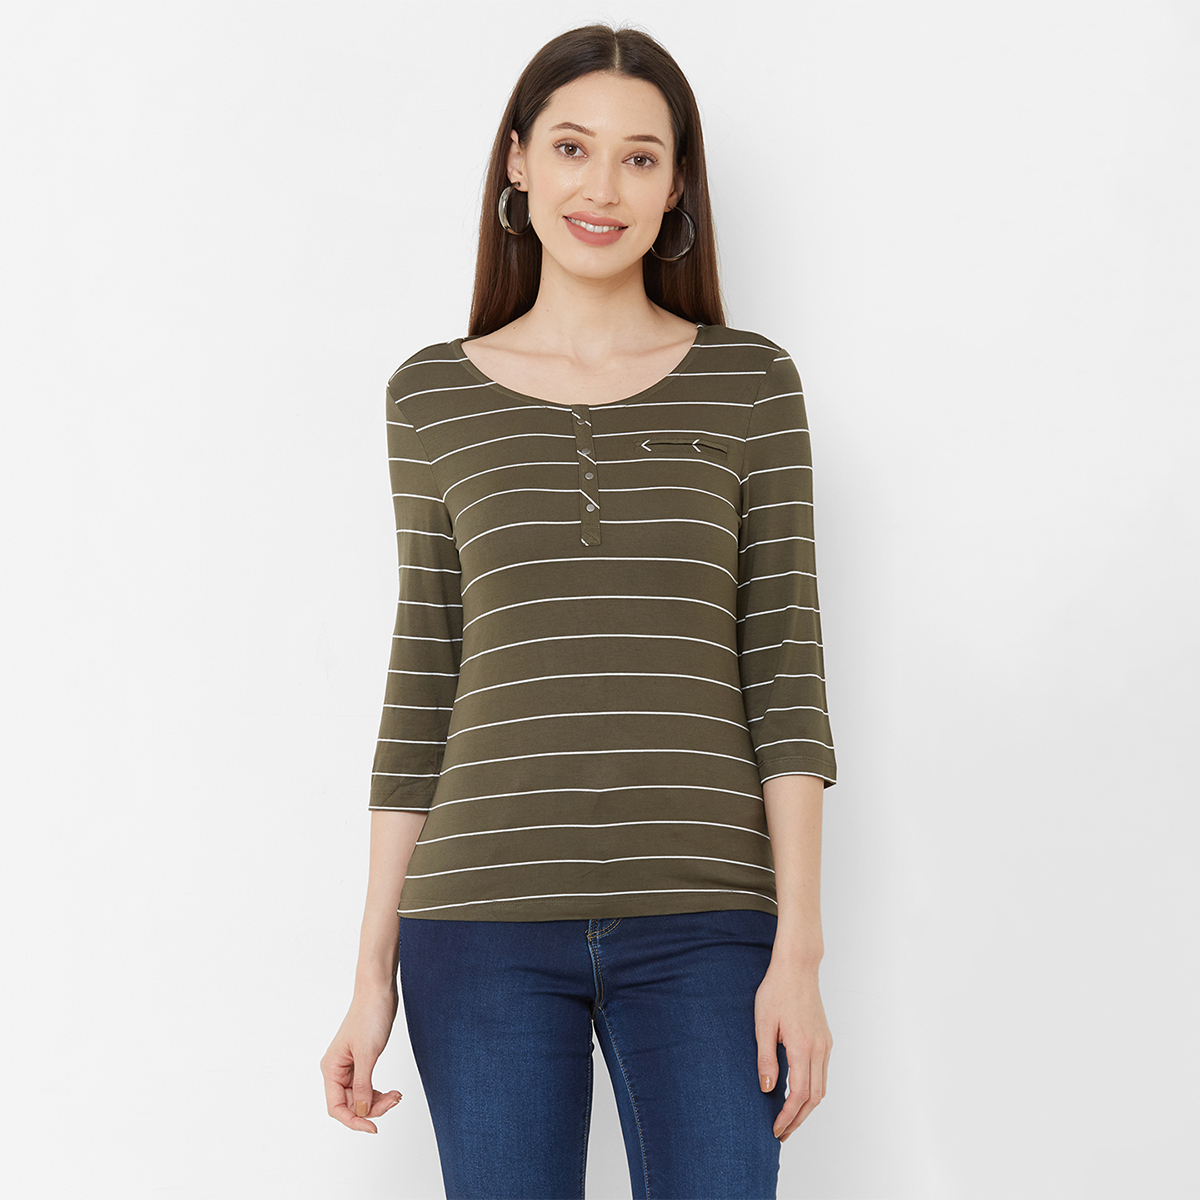 Kraus Jeans T-shirt for Women Olive